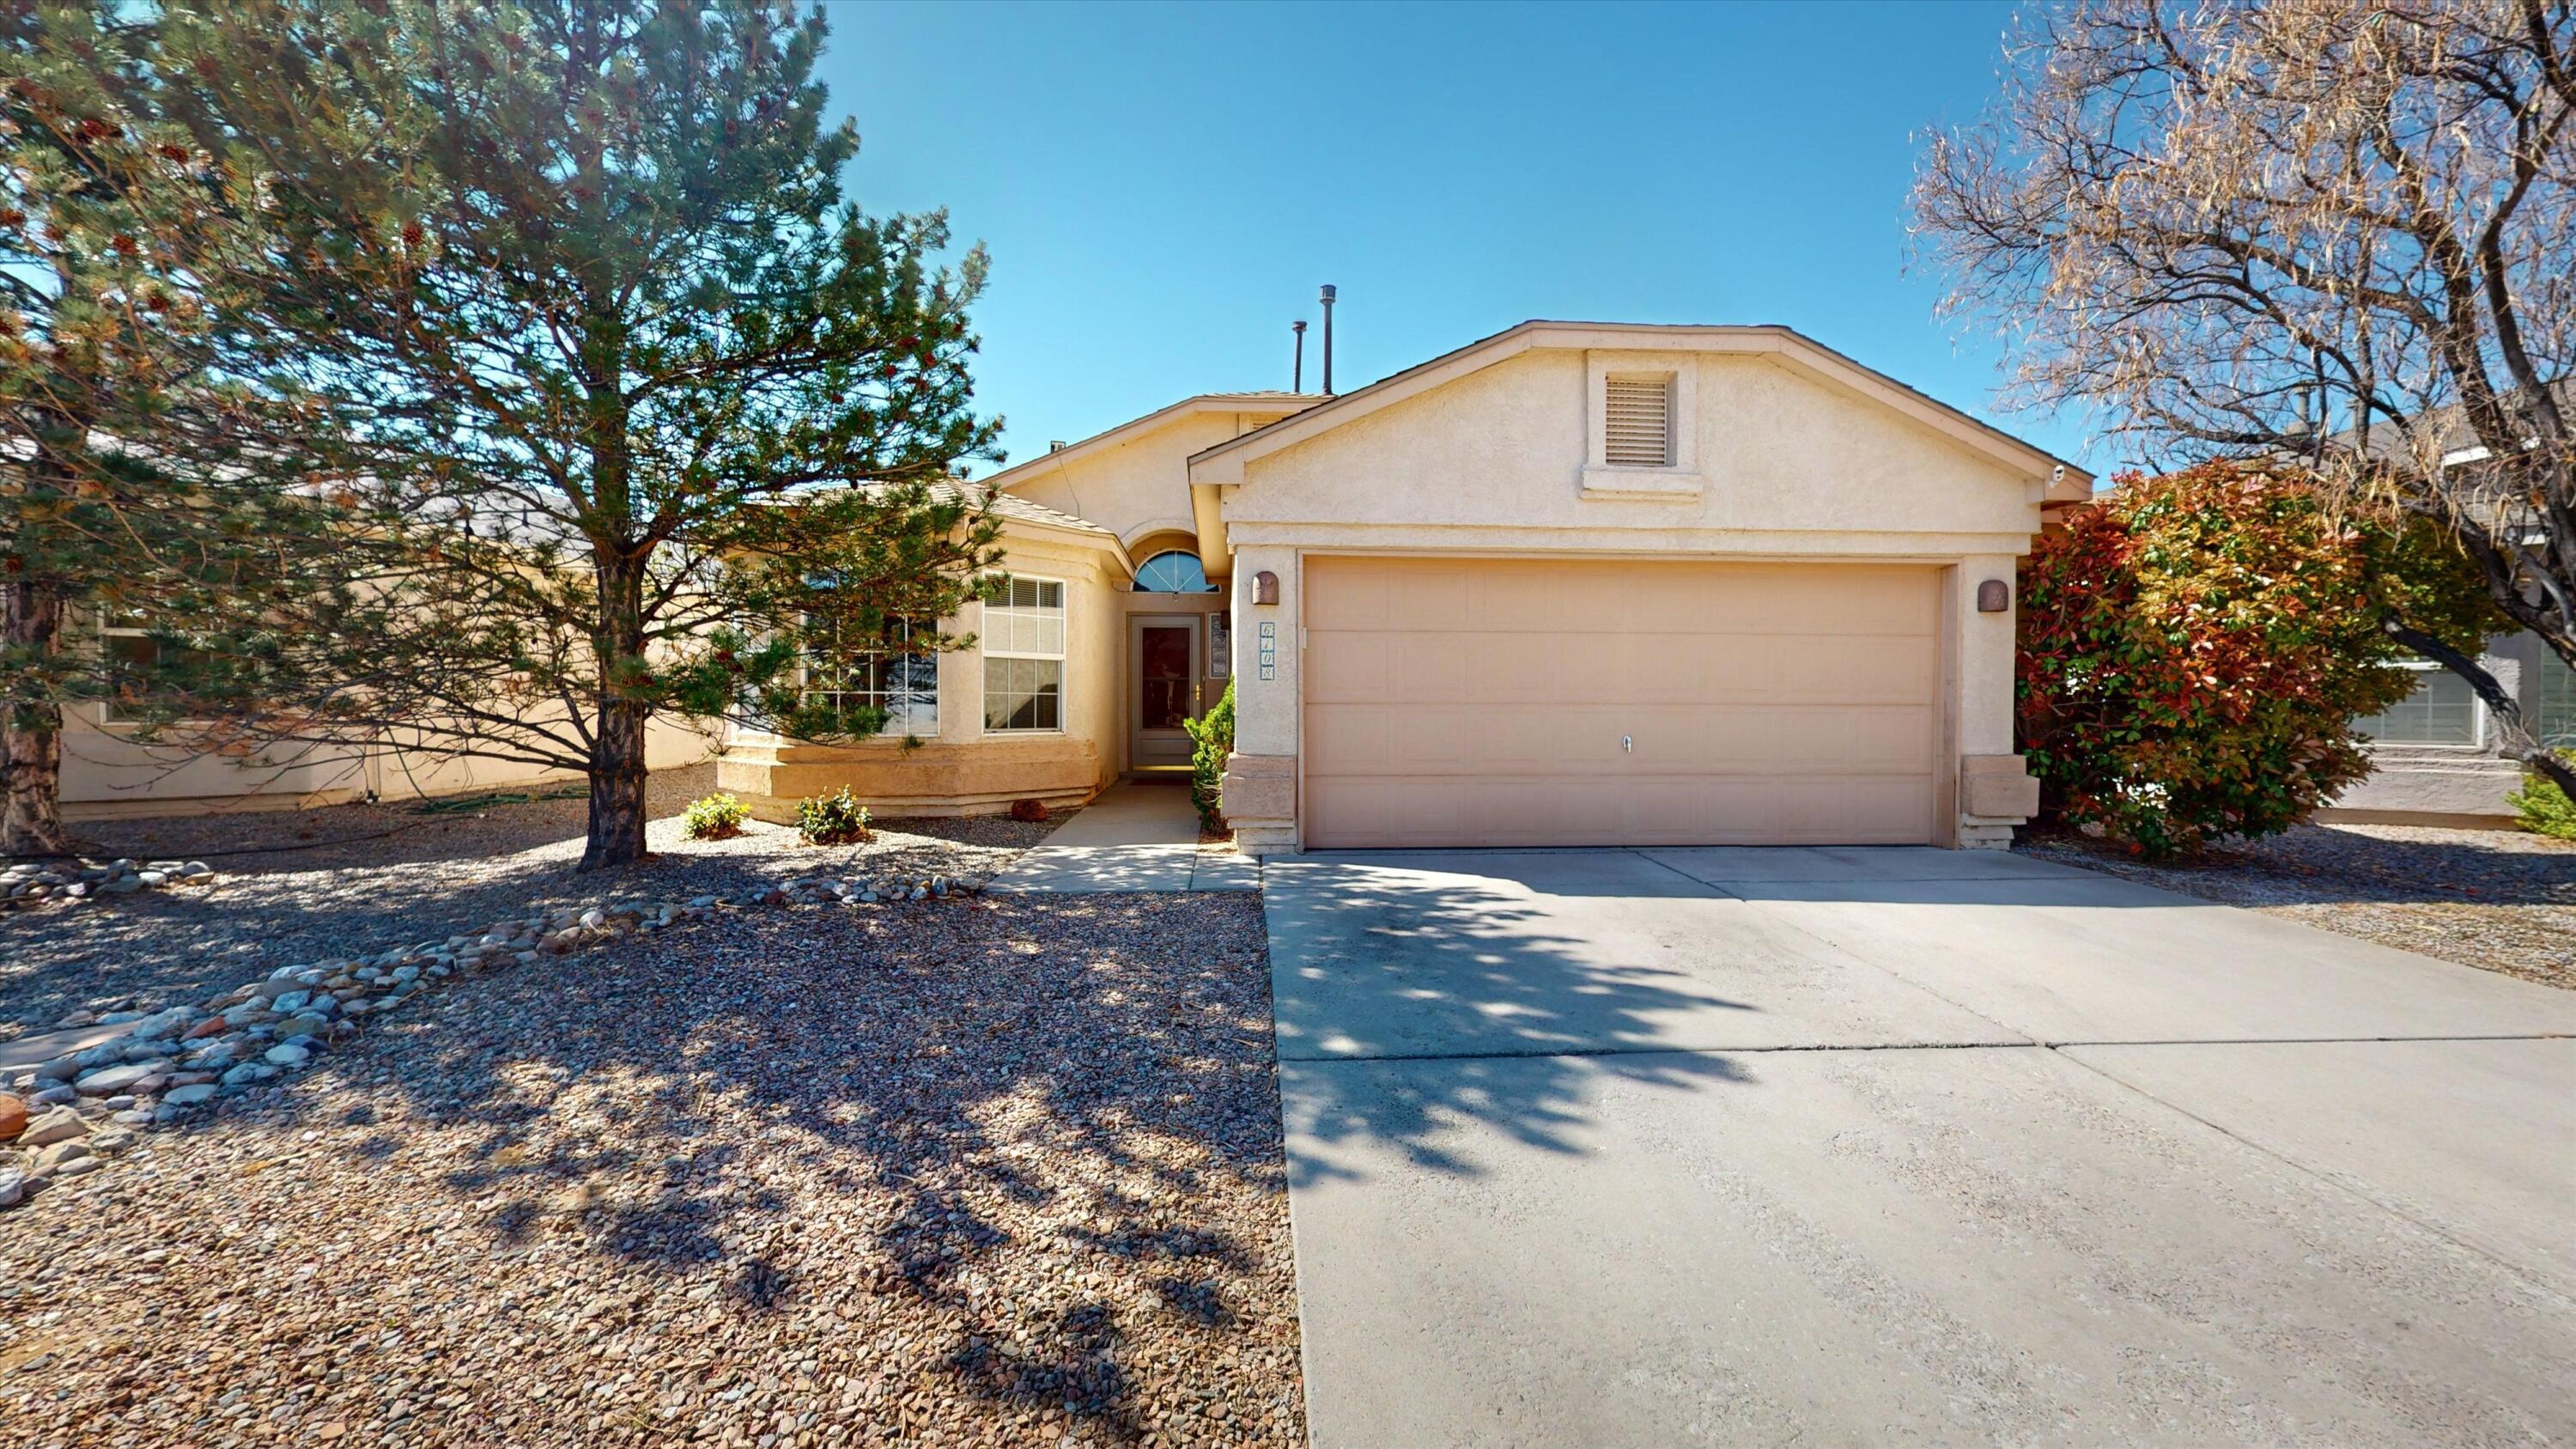 One story home with 3 bedrooms 2 bathrooms, on a cul de sac with walking trail access.